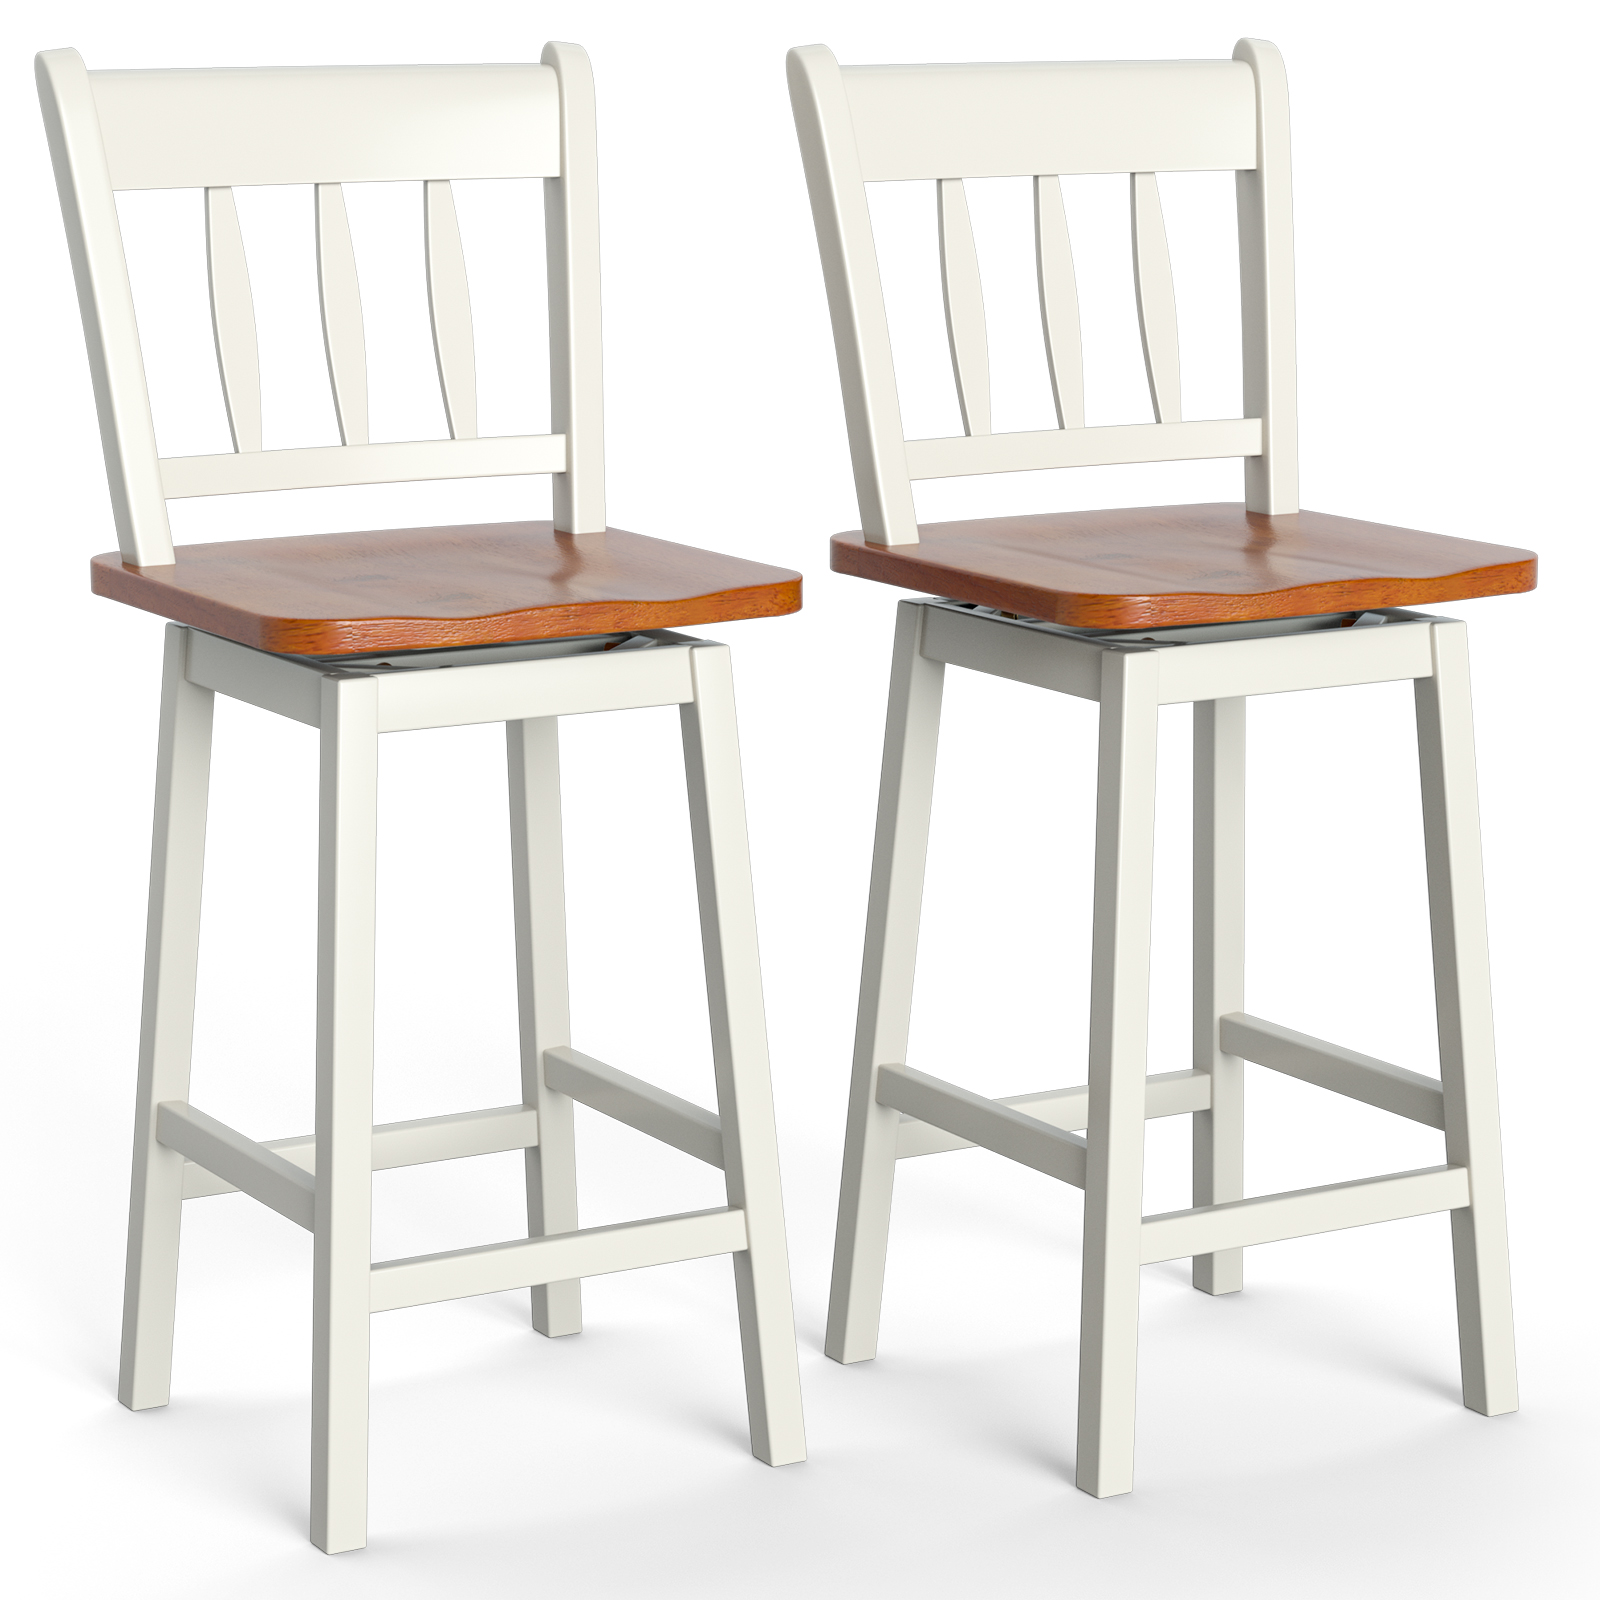 Set of 2 97cm Swivel Rubber Wood Bar Stools with Backrest and Footrest-White